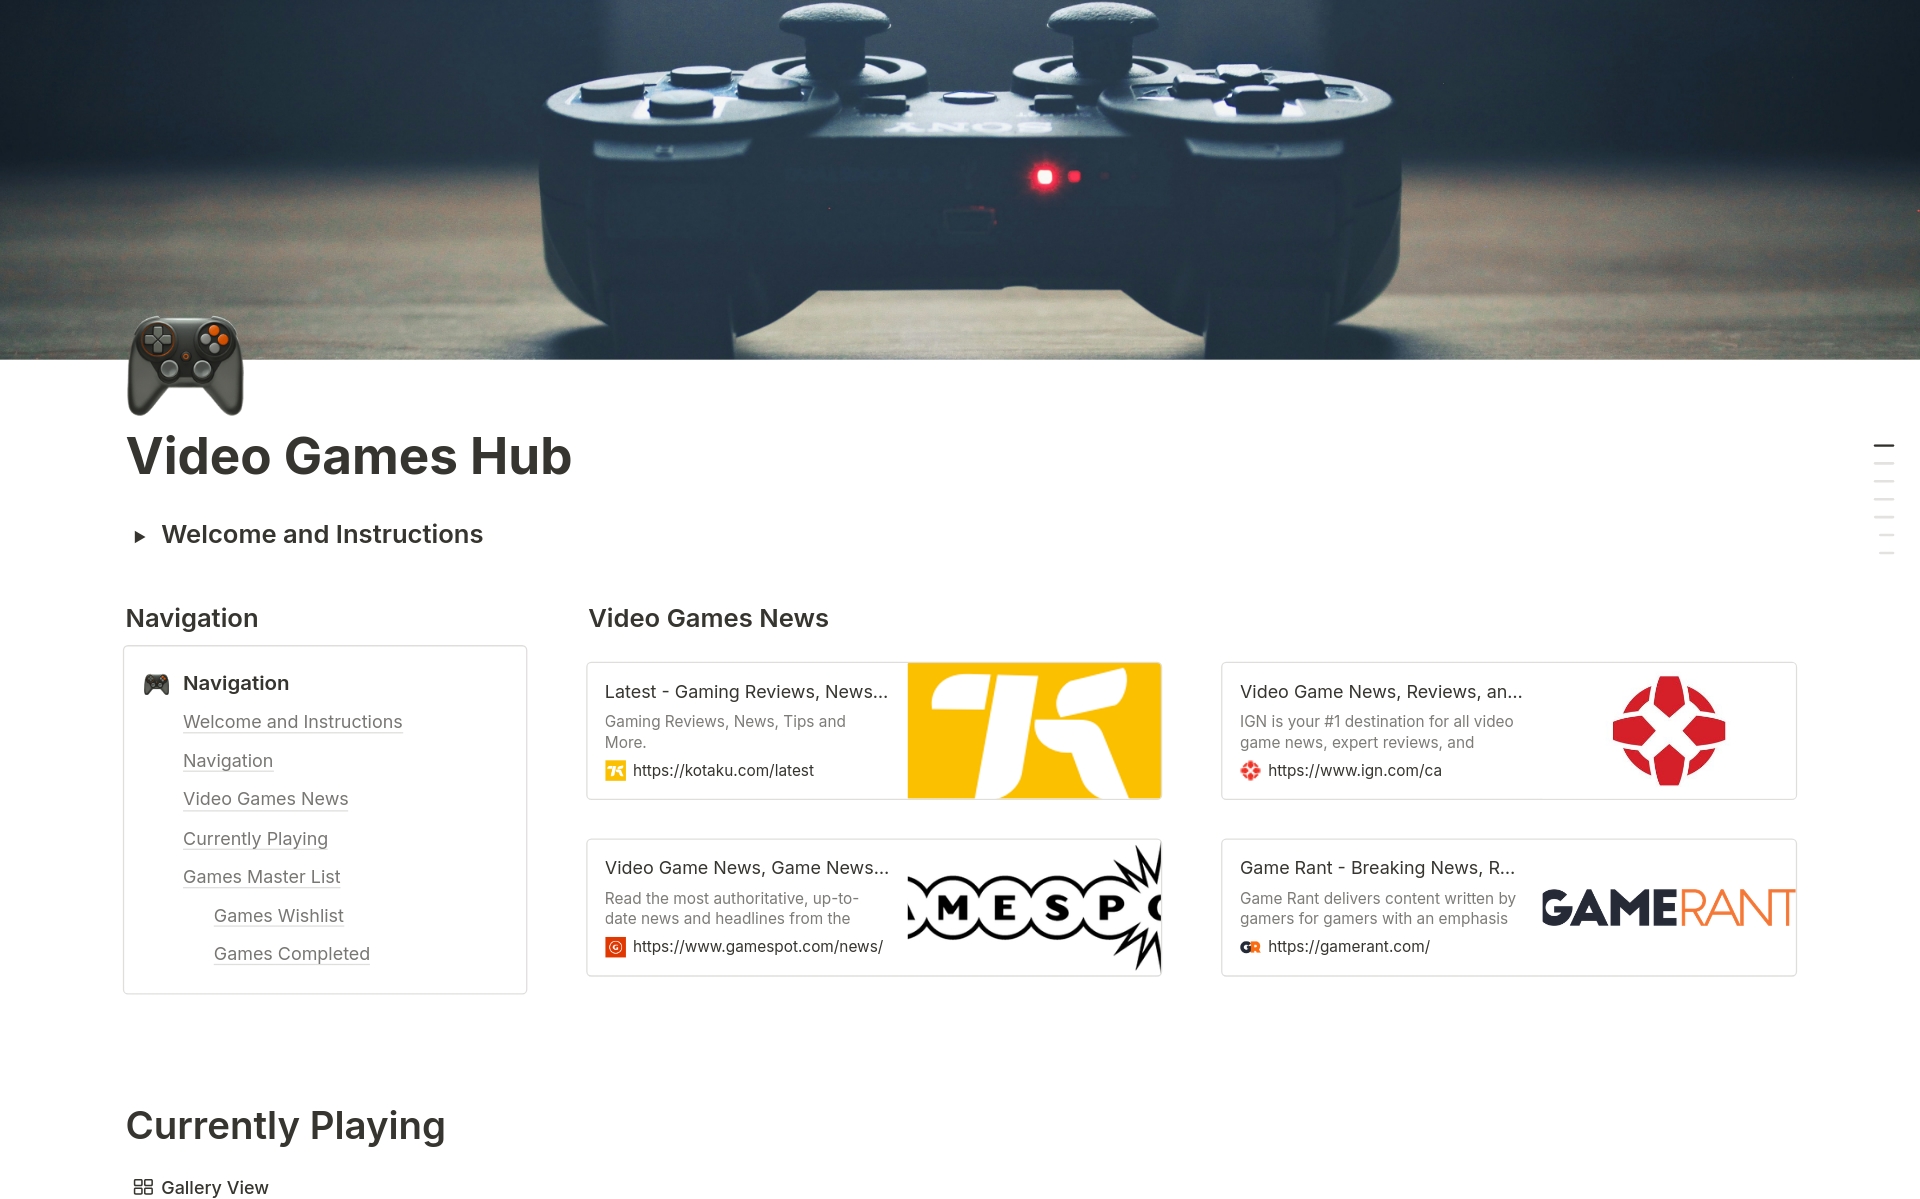 This template is the perfect hub for any gaming lover who likes to stay organized with their game library. Keep track of your wishlist, upcoming games and release dates, and your scheduled game nights, solo or with friends!